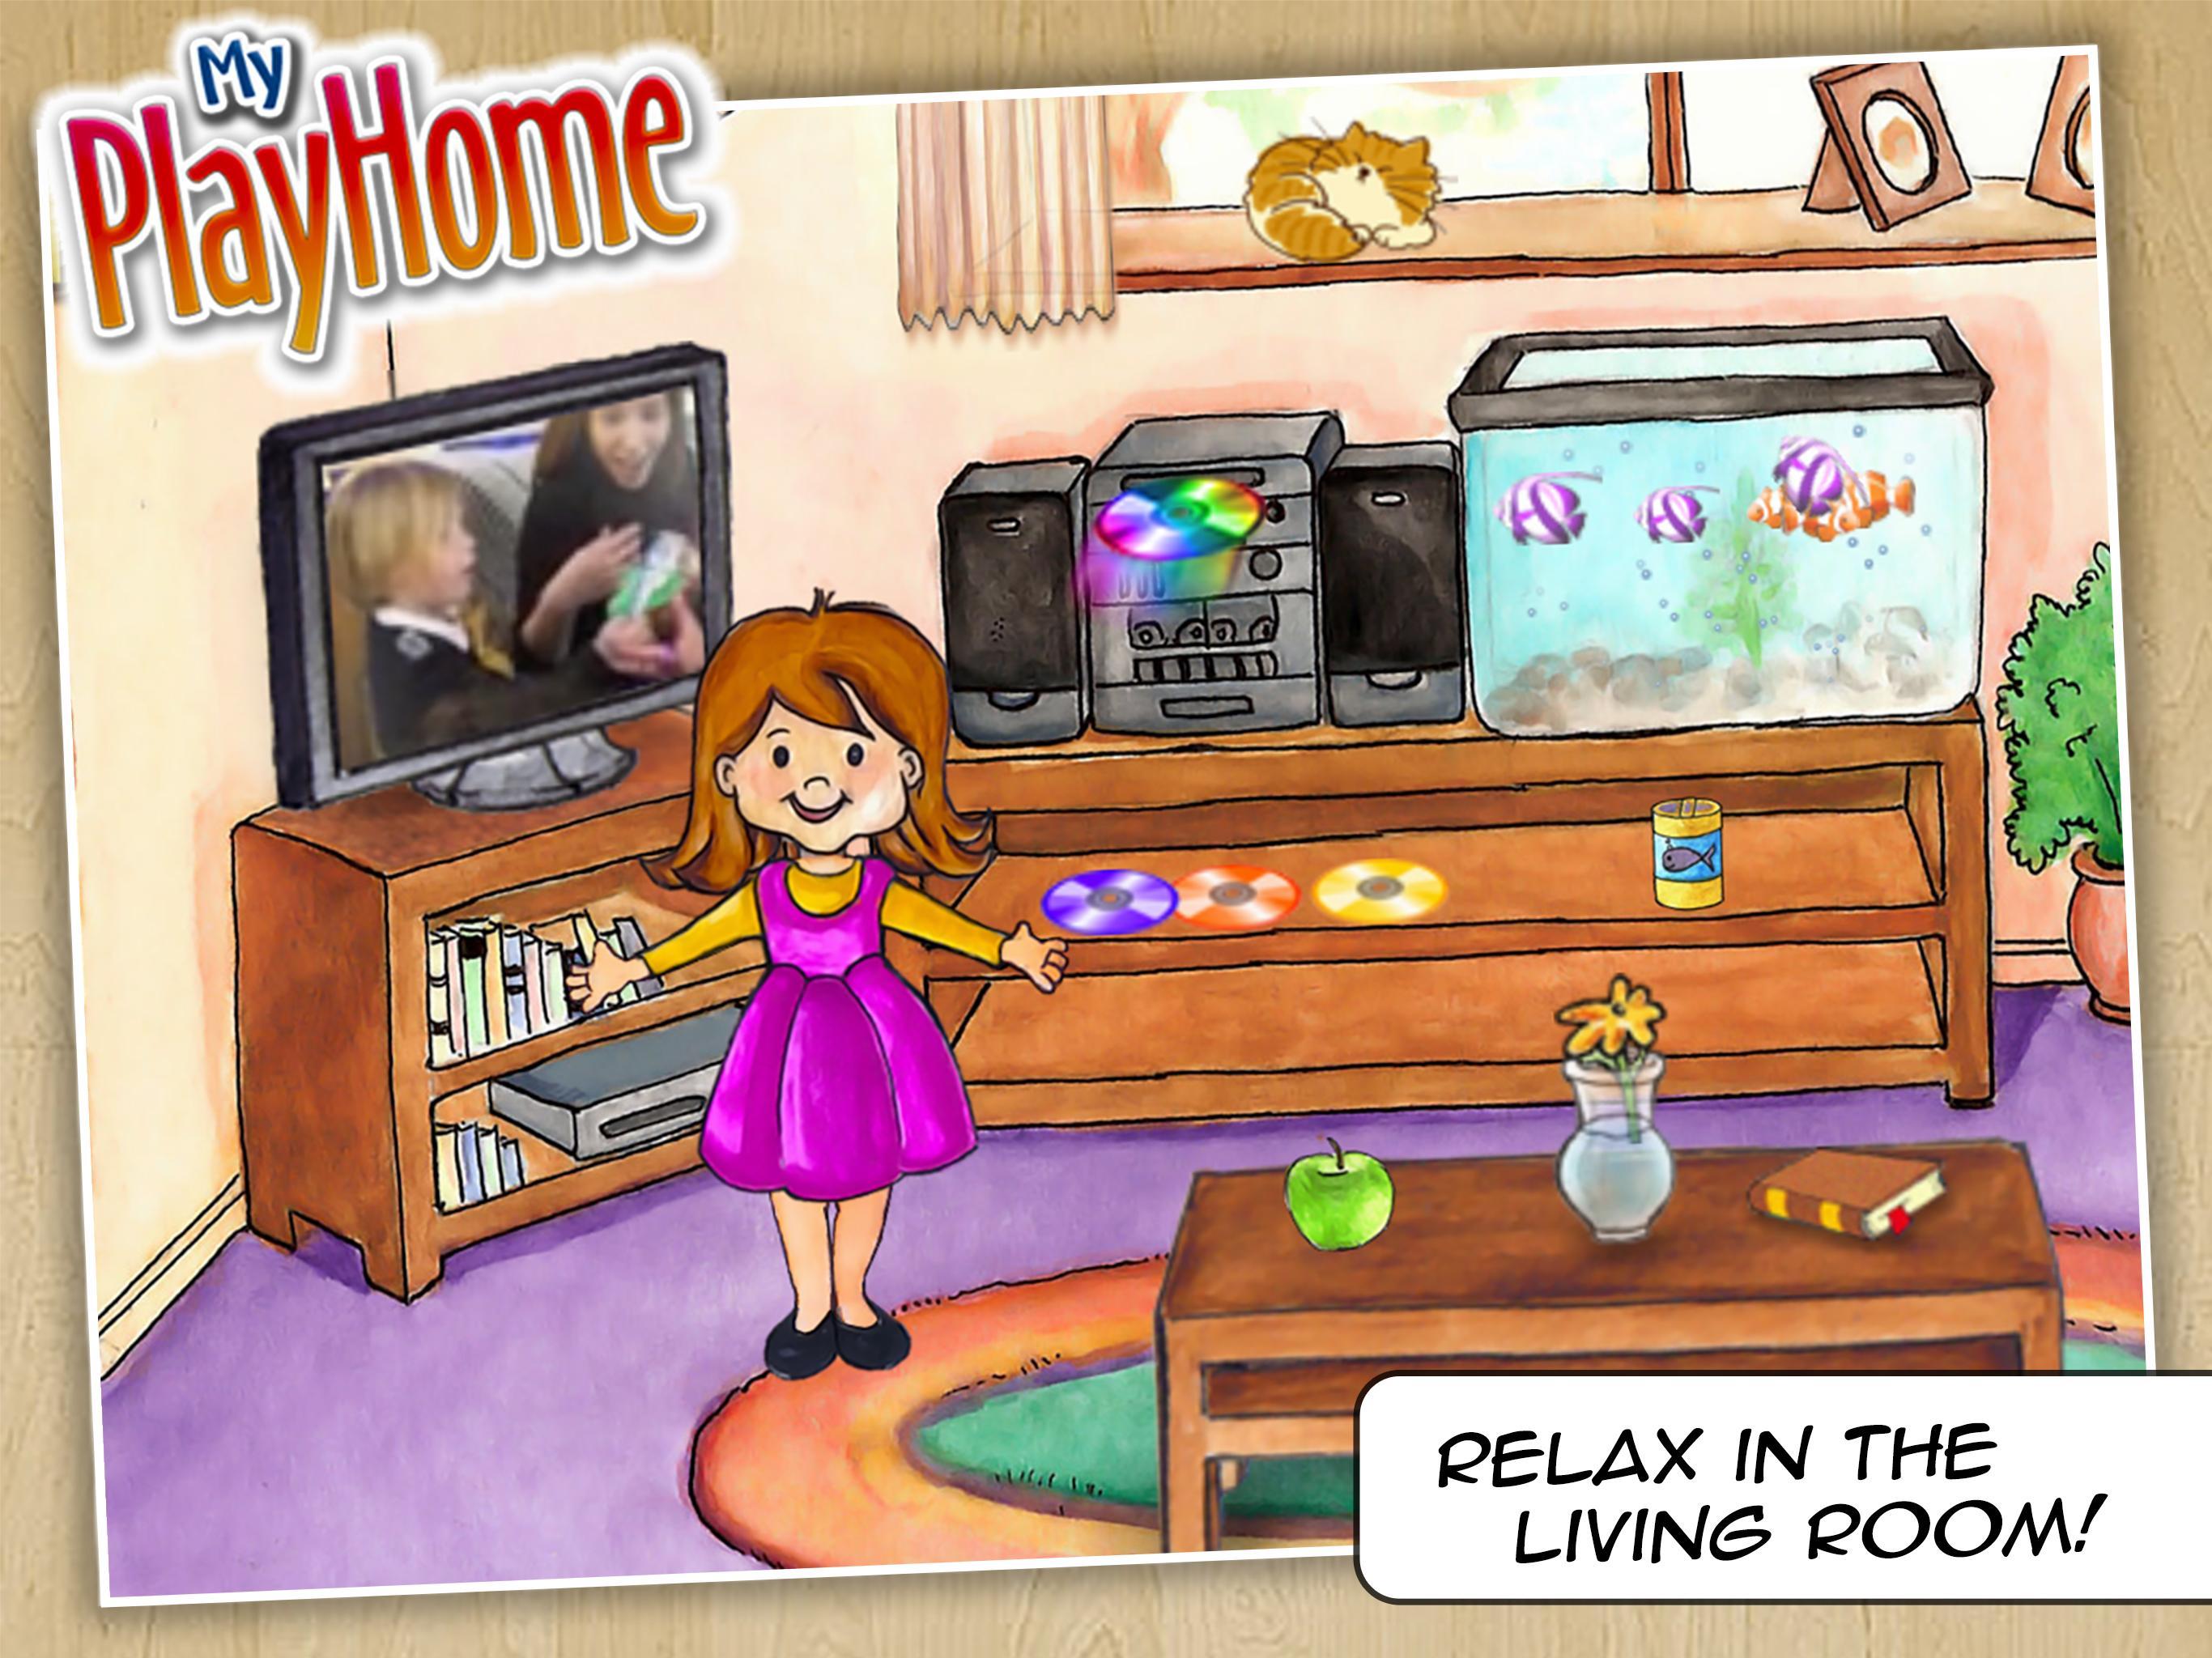 My first game. Play Home игра. My Home игра. Обновление my Play Home. My Play Home Plus.